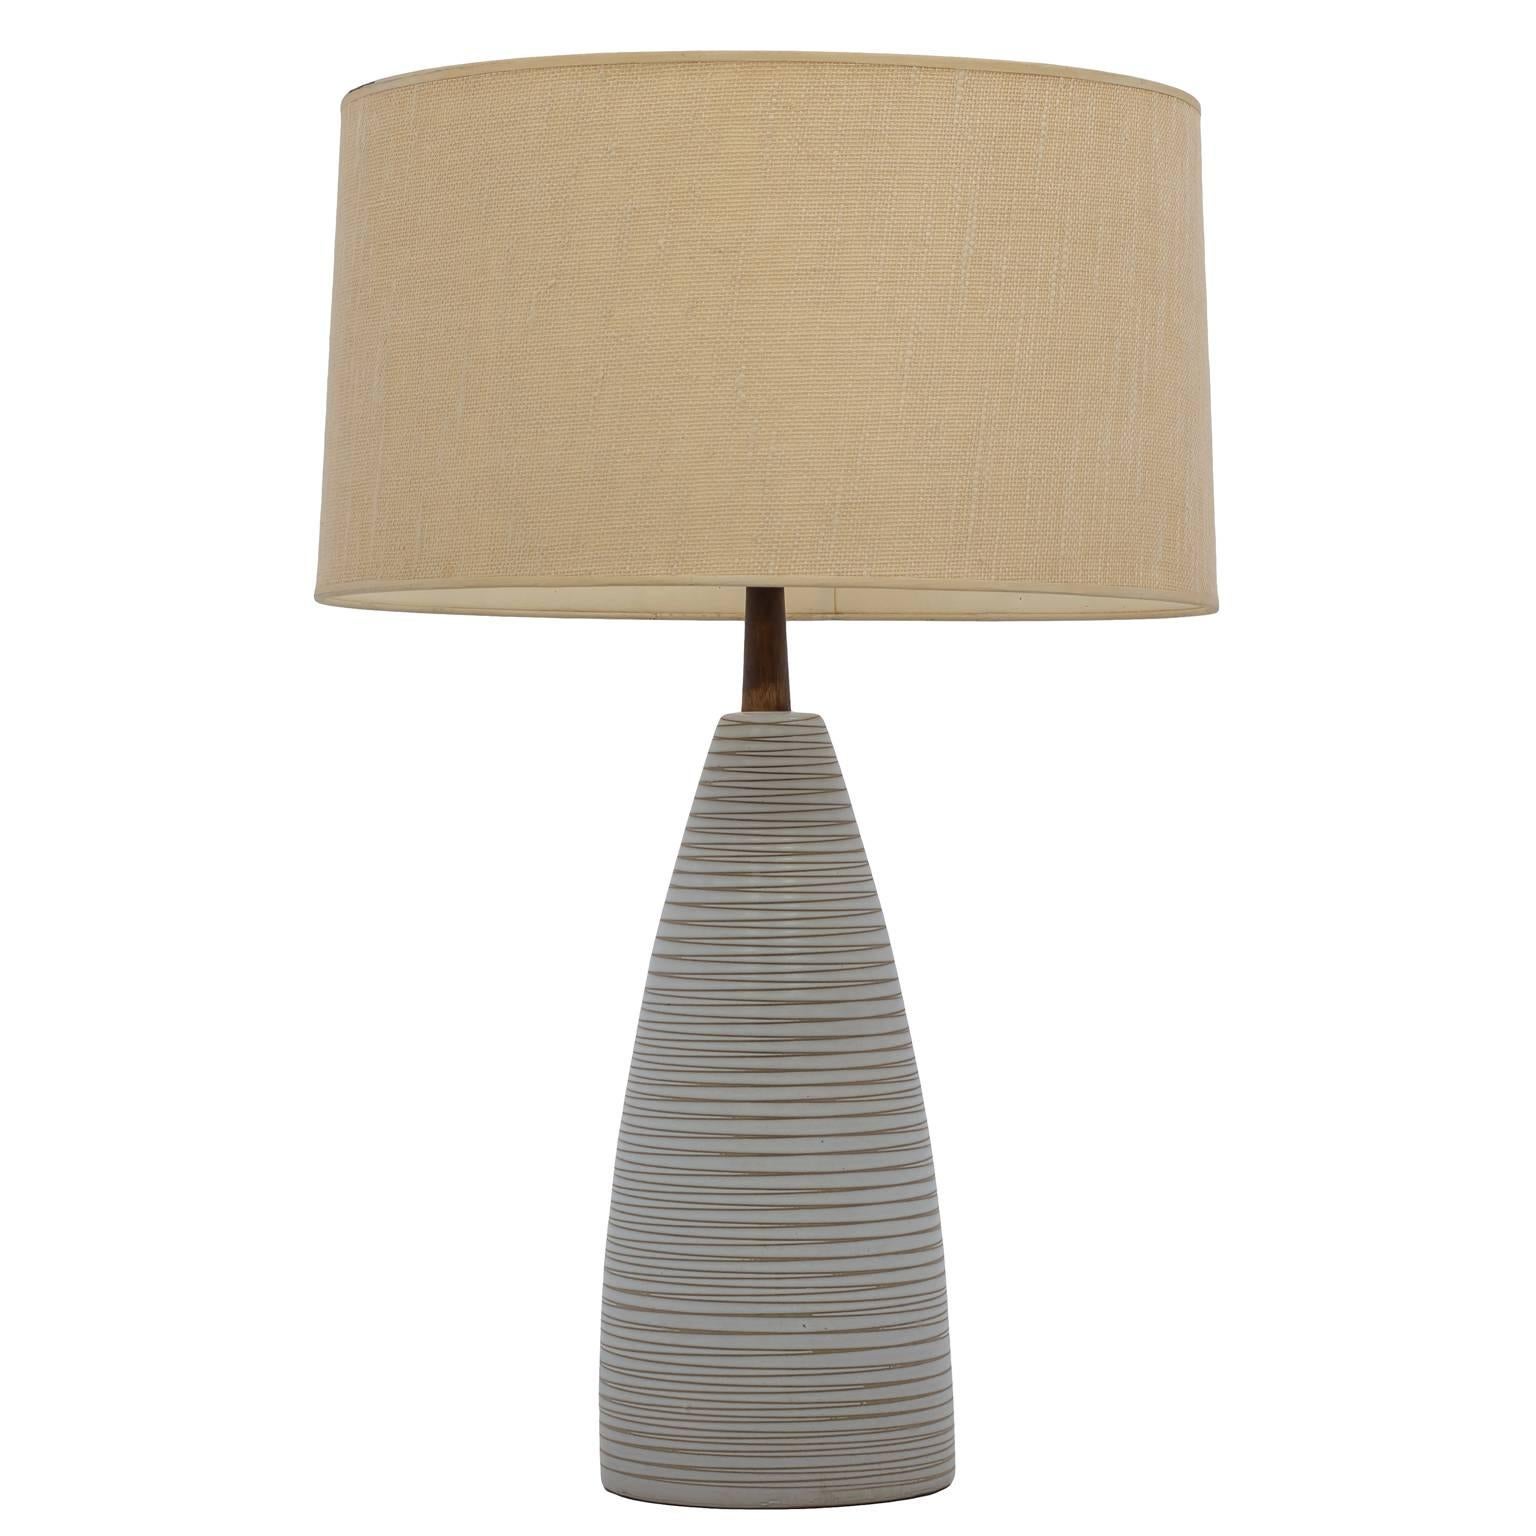 Mid-century table lamp from the pottery studio of Jane and Gordon Martz. This table lamp is in the Martz's signature neutral toned, eggshell, off-white ceramic glaze with a walnut neck. It features an incised linear design going through the glaze